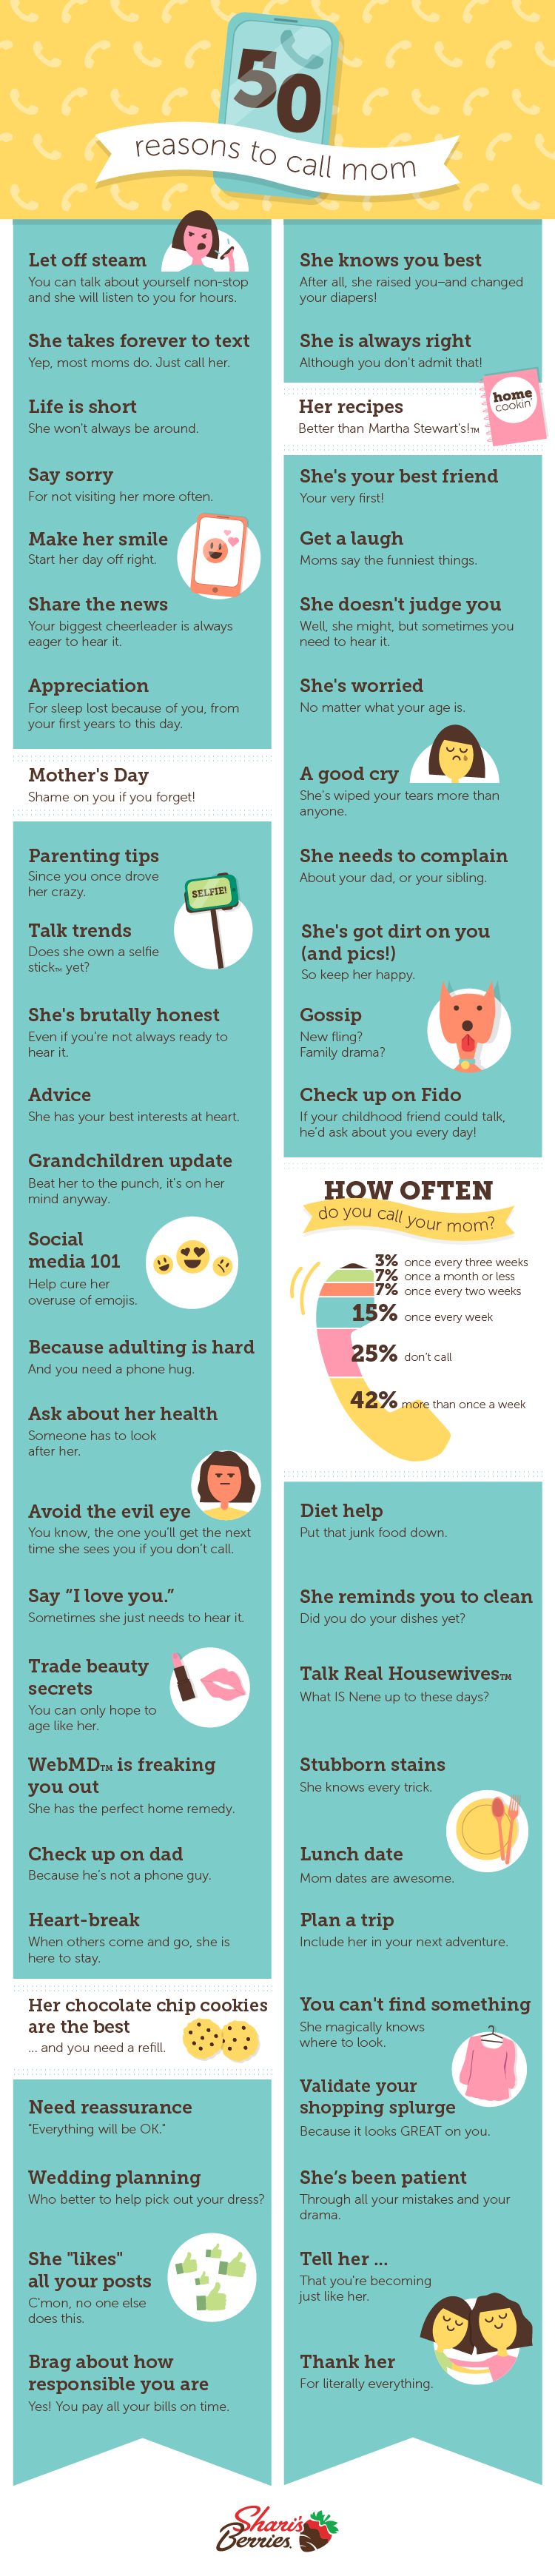 50 reasons to call mom infographic